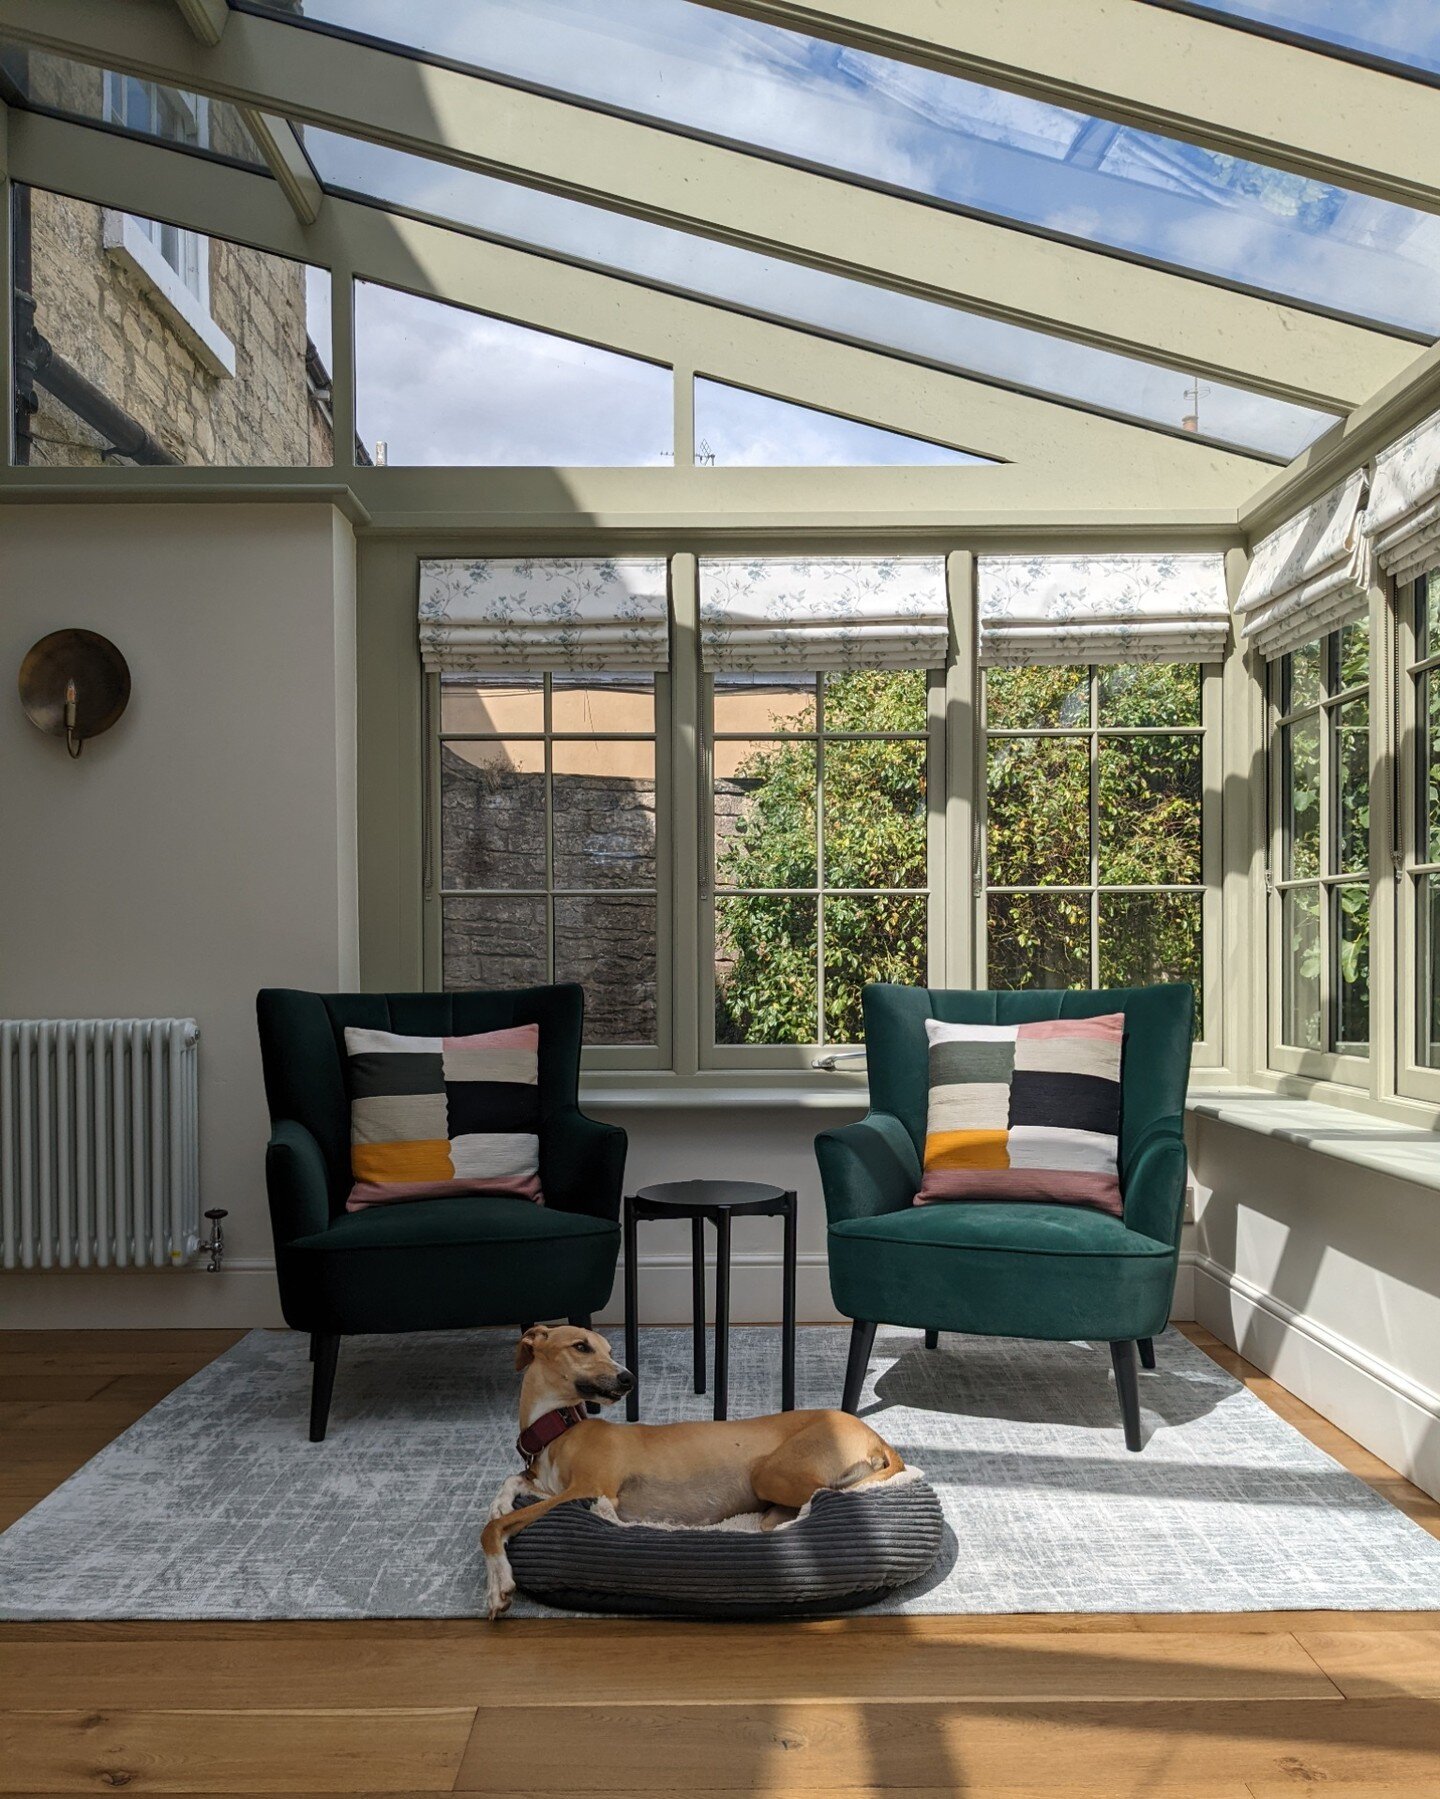 Jack the whippet enjoying this sunny spot at my Georgian project in Boston Spa. Kitchen-diner-playroom reveal coming soon!
.
.
.
.
#orangerie #interiordesign #interiorstyling #whippet #georgianhome #sittingarea #periodhomes #greenpaint #littlegreene 